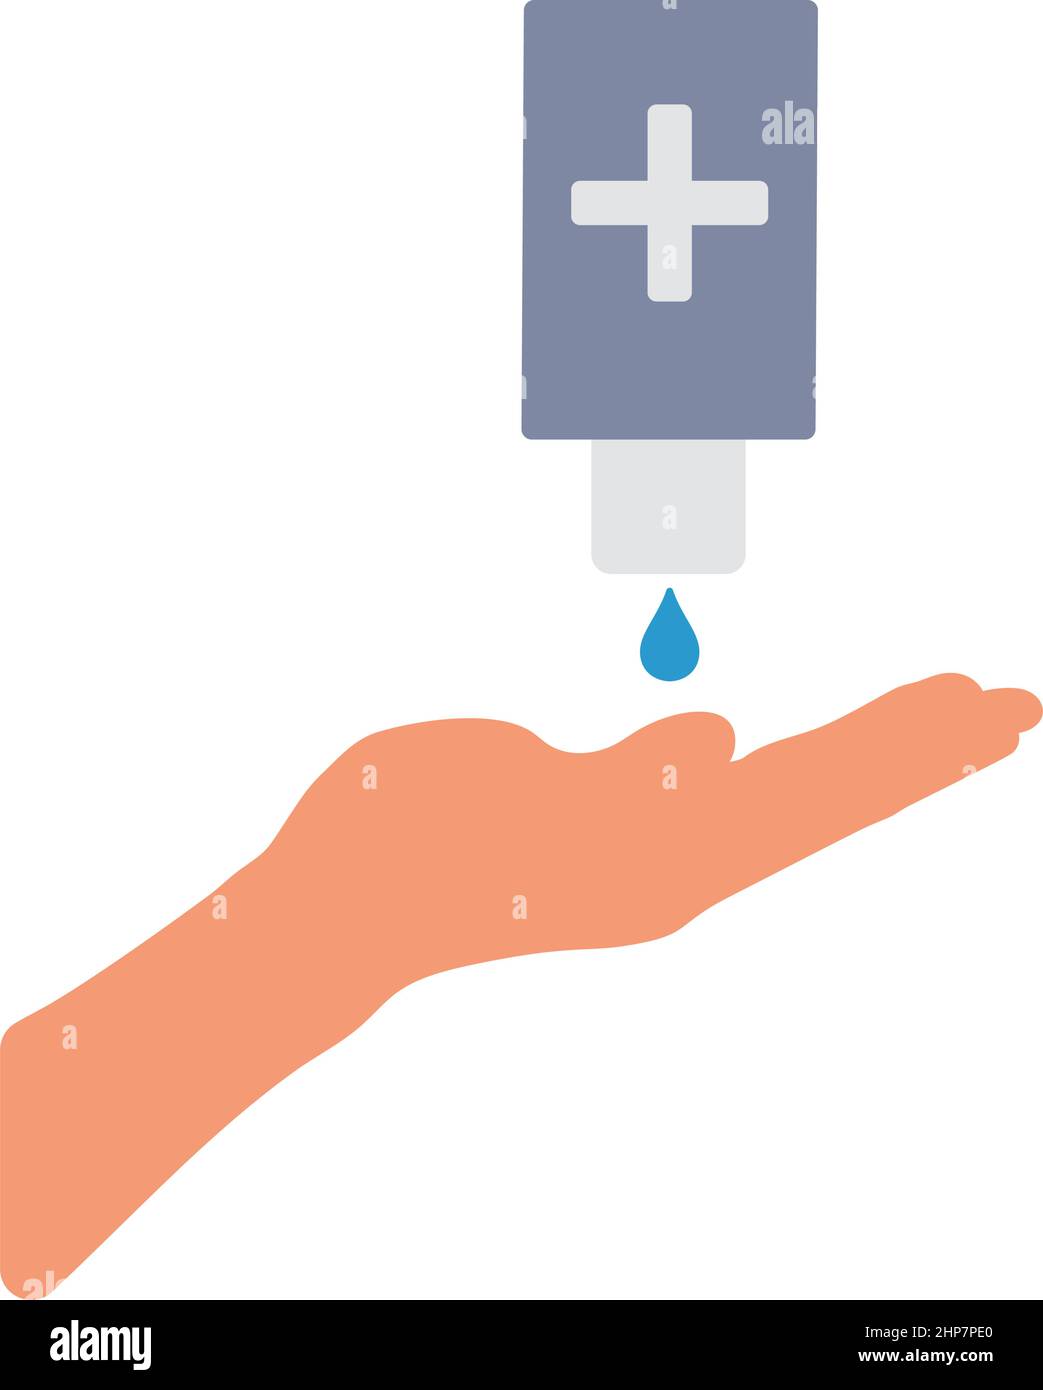 Sanitizer With Hand Icon Stock Vector